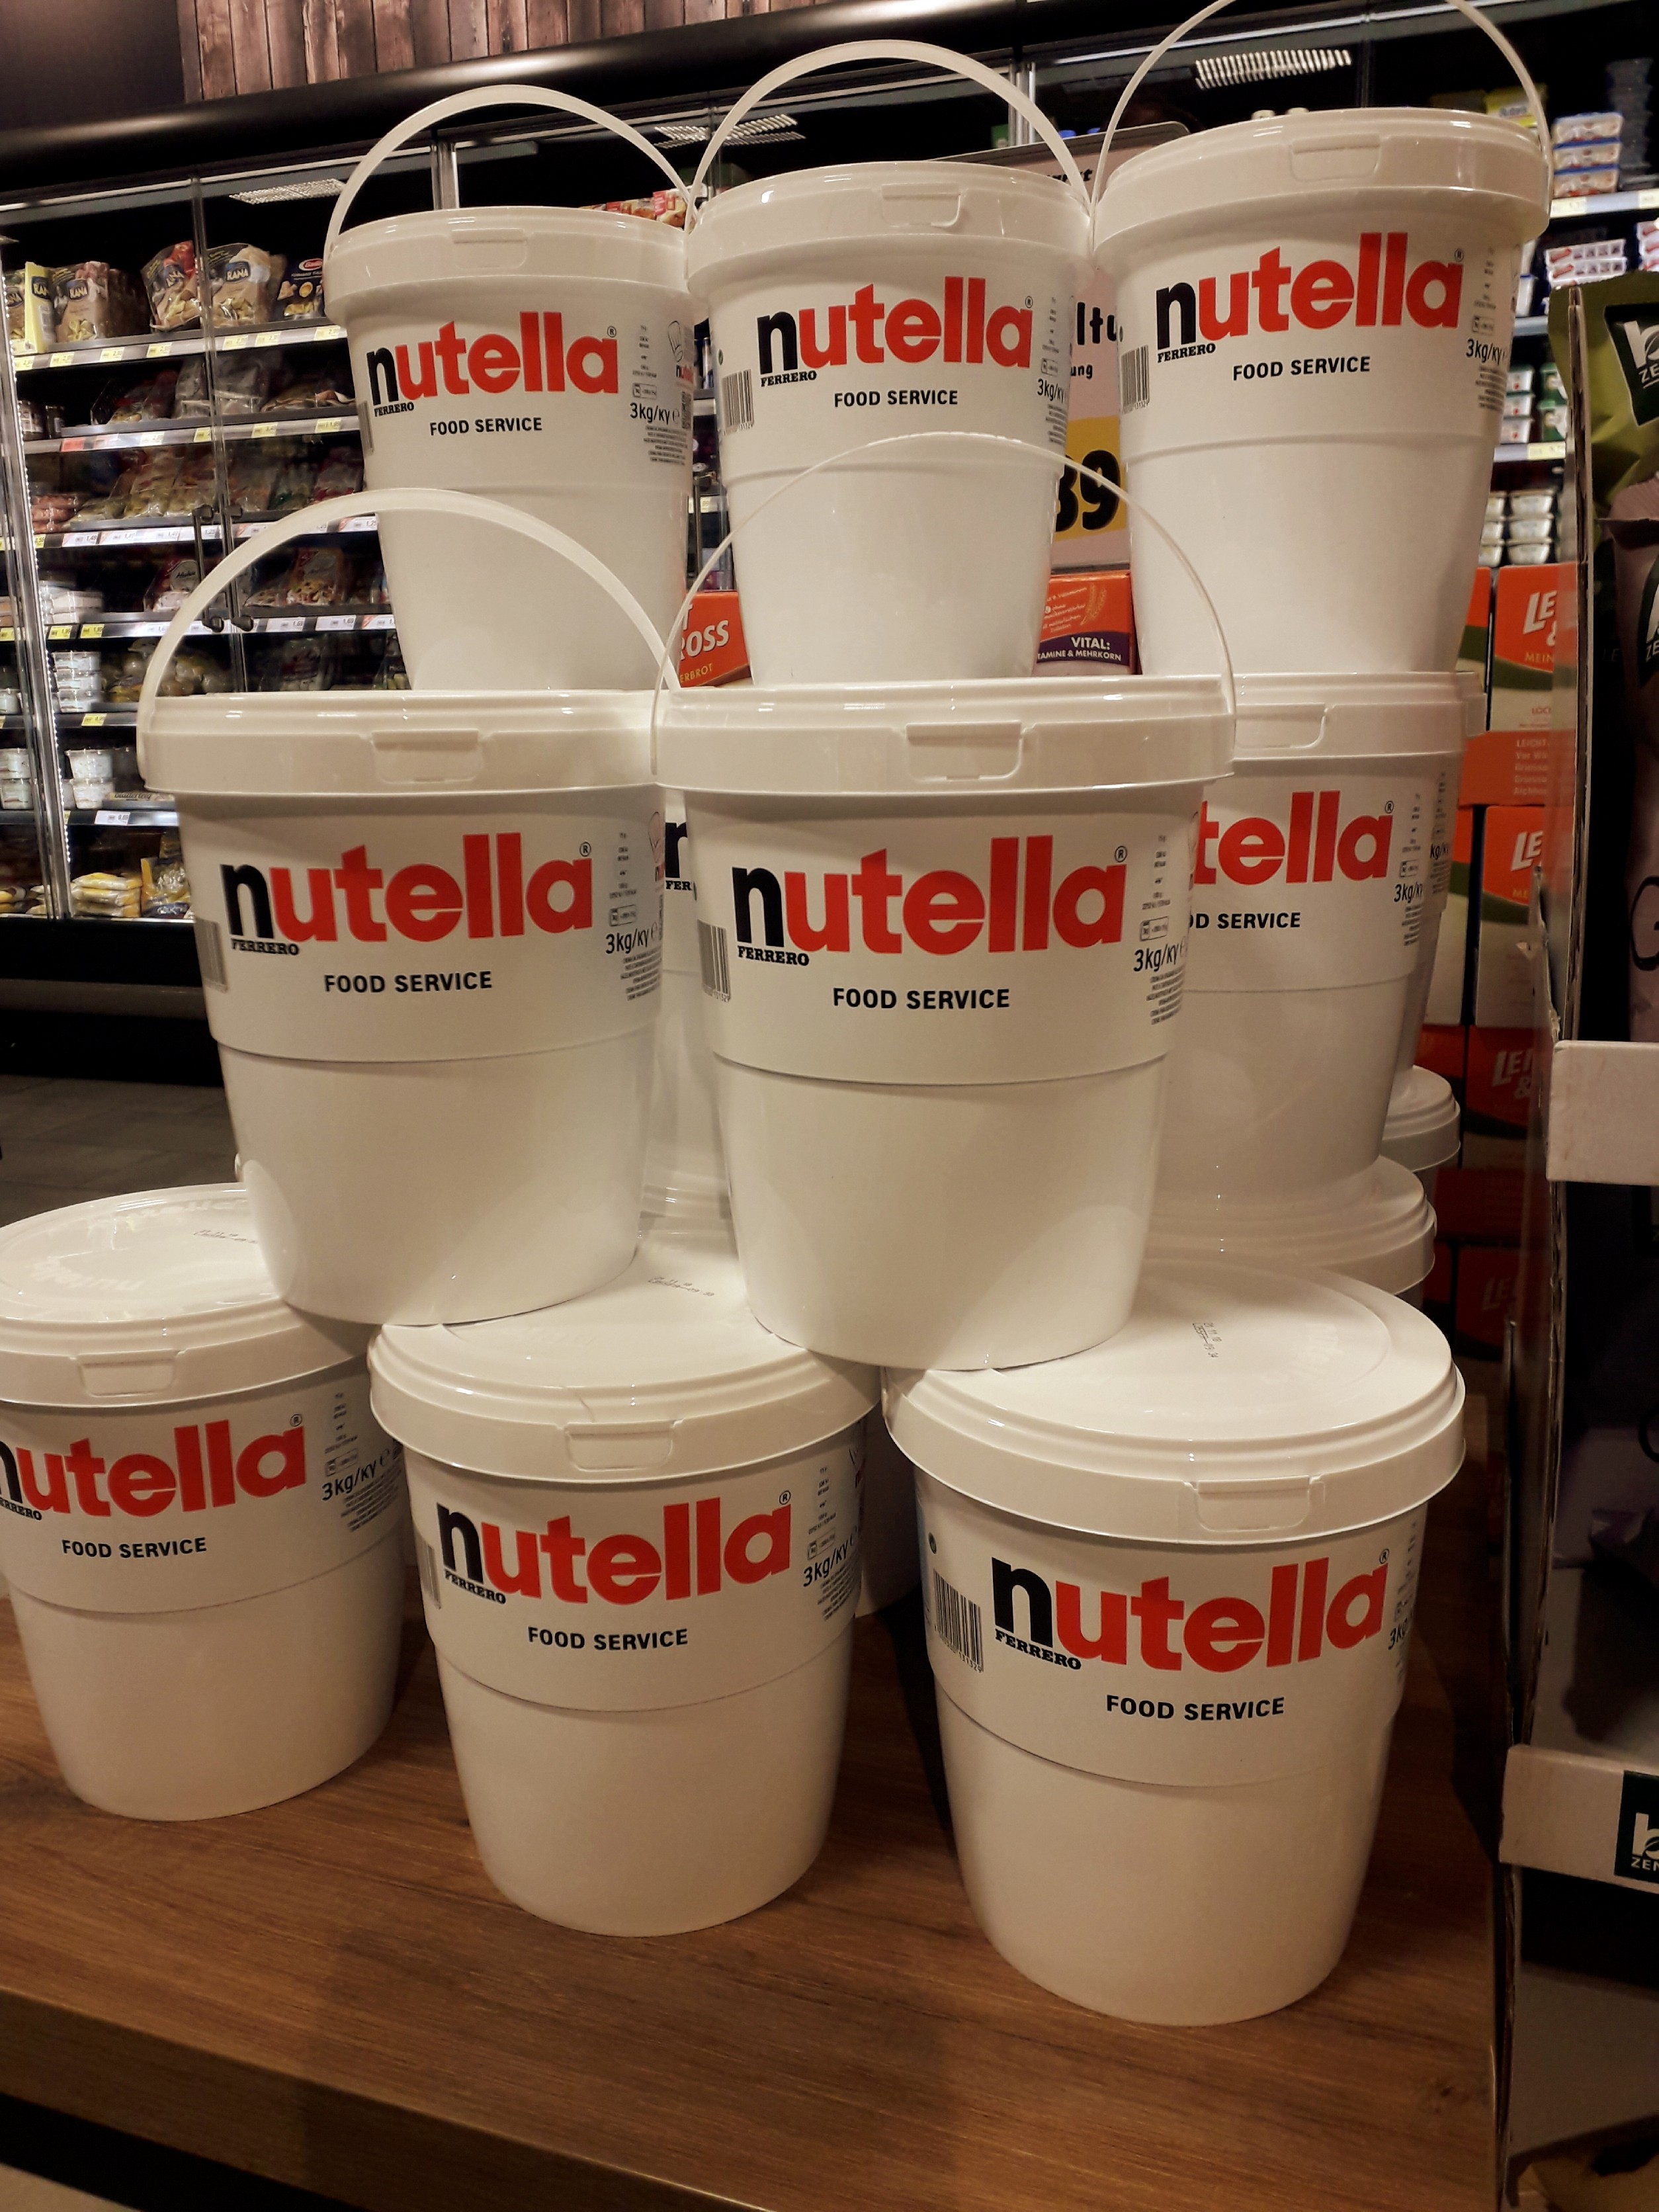 A Supermarket in Germany Now Sells Nutella in Enormous Buckets